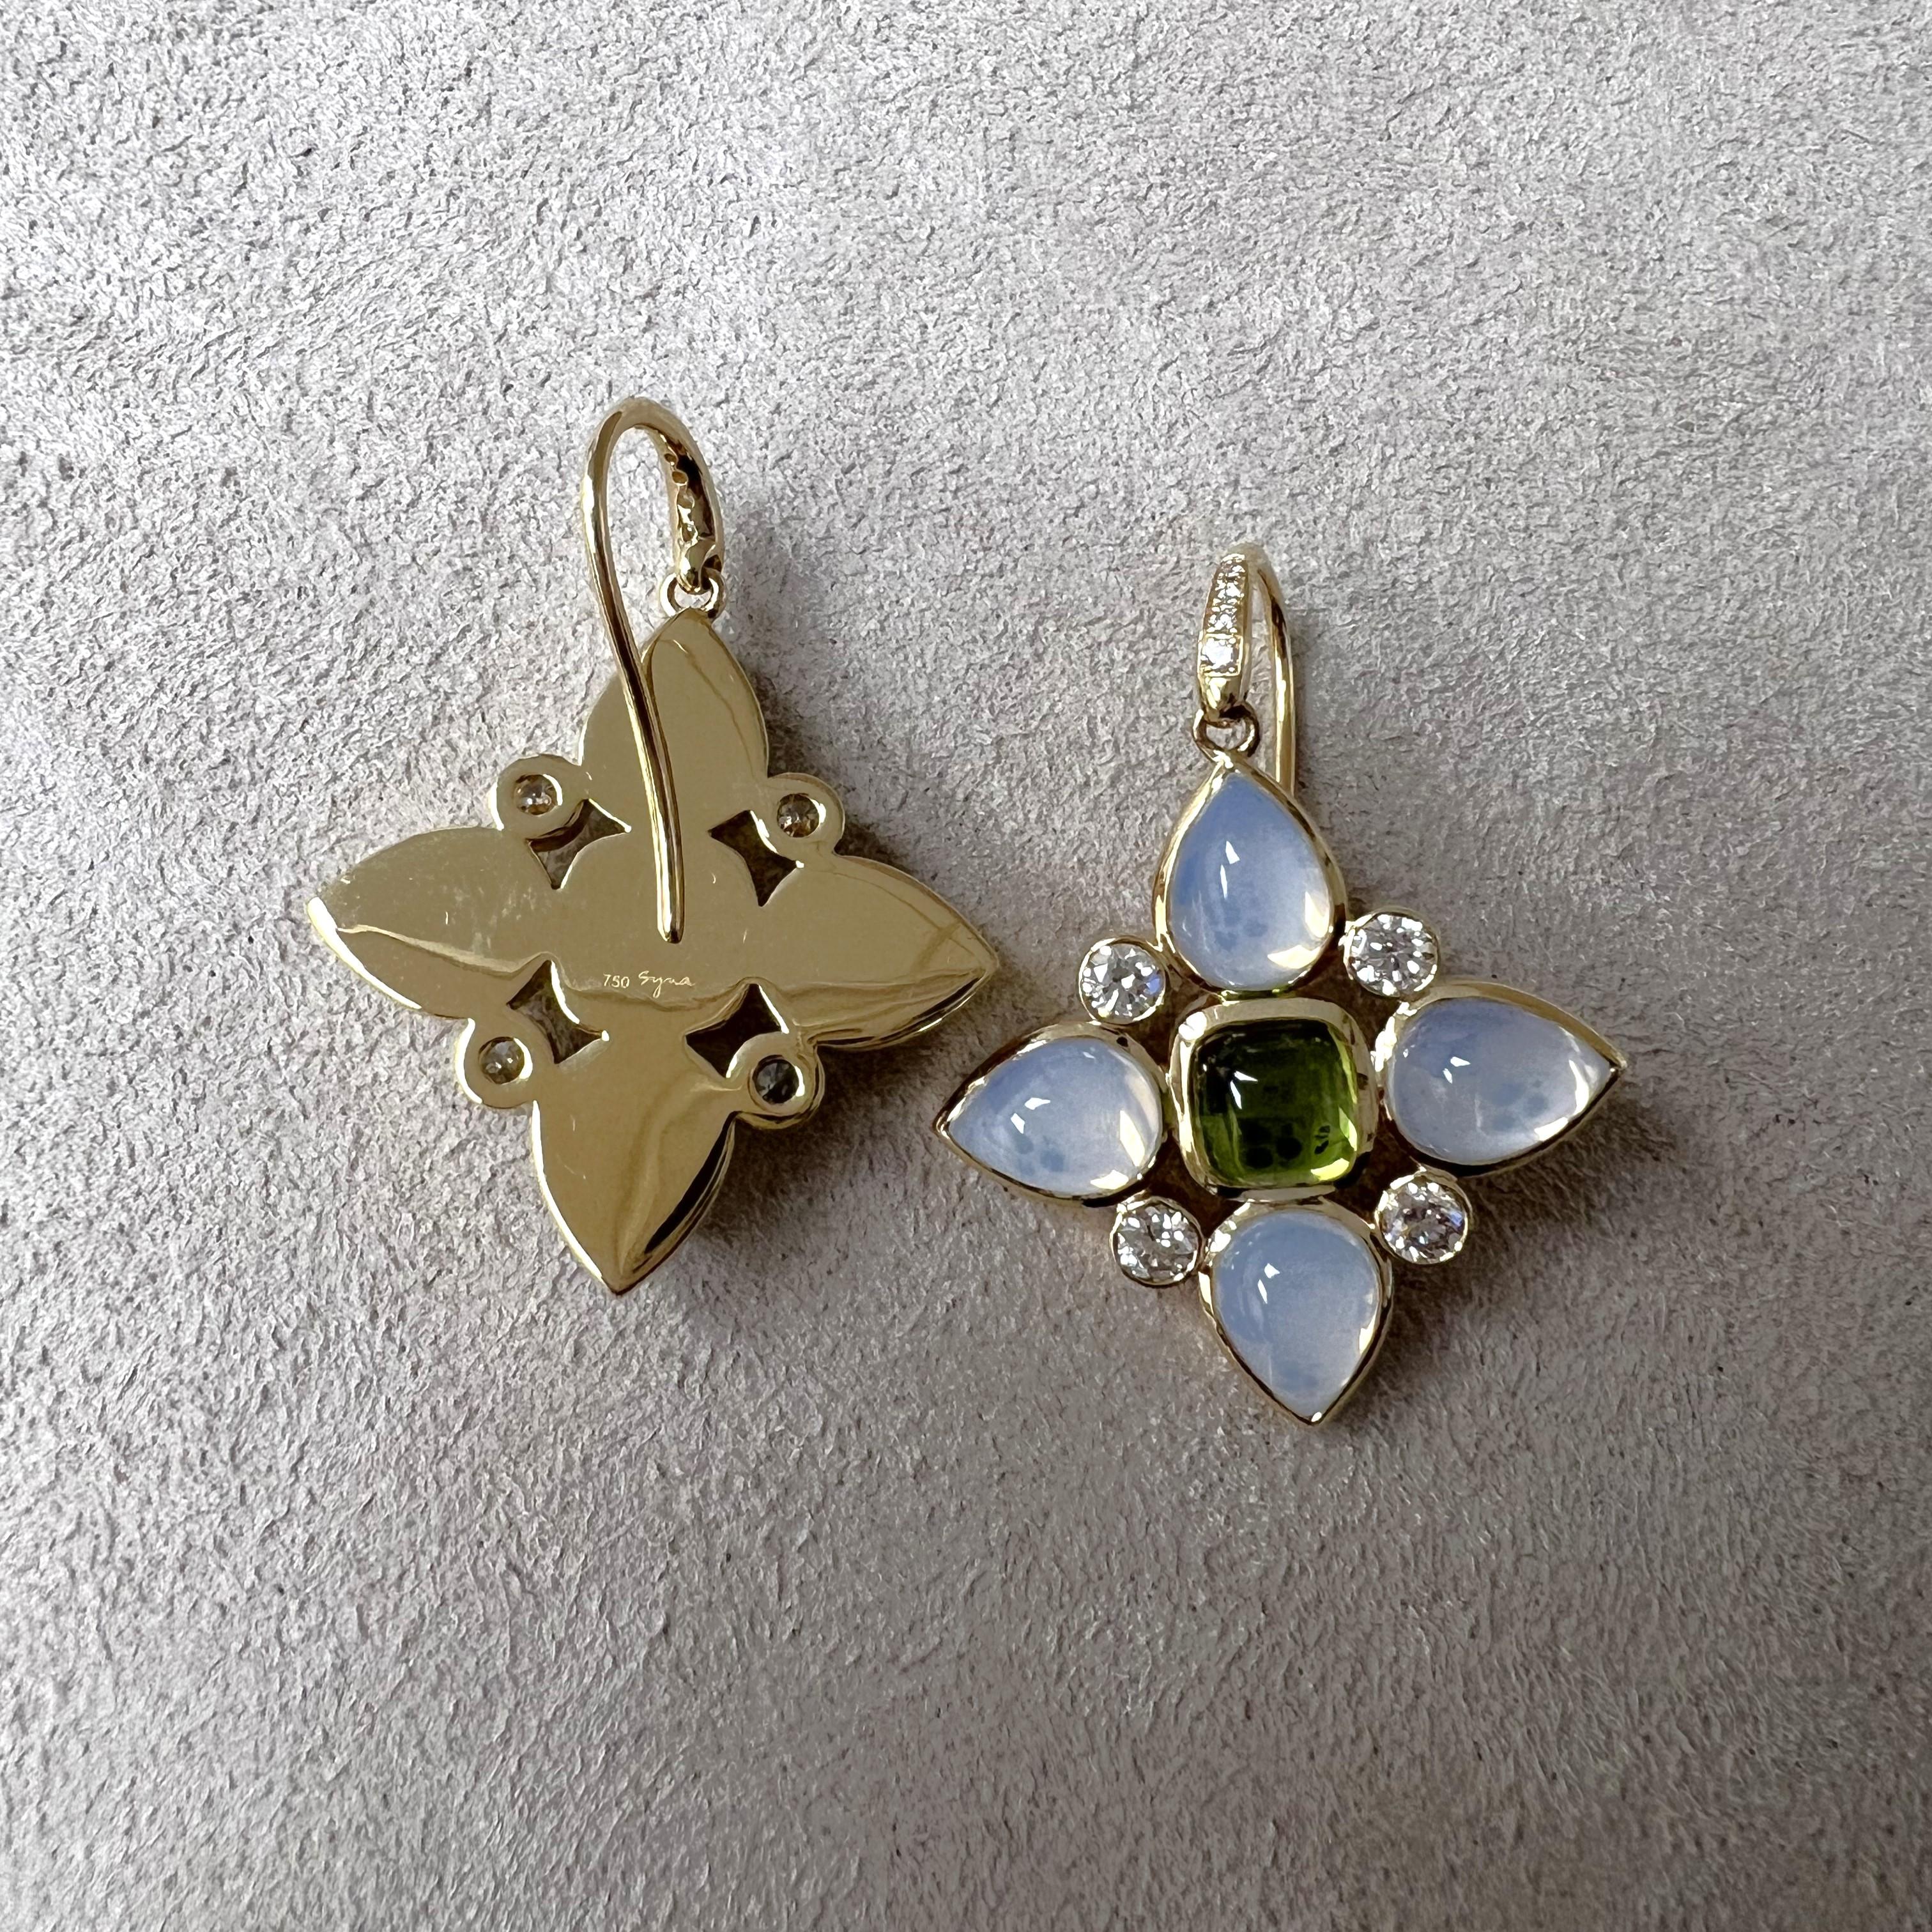 Created in 18 karat yellow gold
Moon quartz 9 carats approx.
Peridot 3 carats approx.
Diamonds 0.90 carat approx.
French wire for pierced ears
Limited Edition


About the Designers

Drawing inspiration from little things, Dharmesh & Namrata Kothari